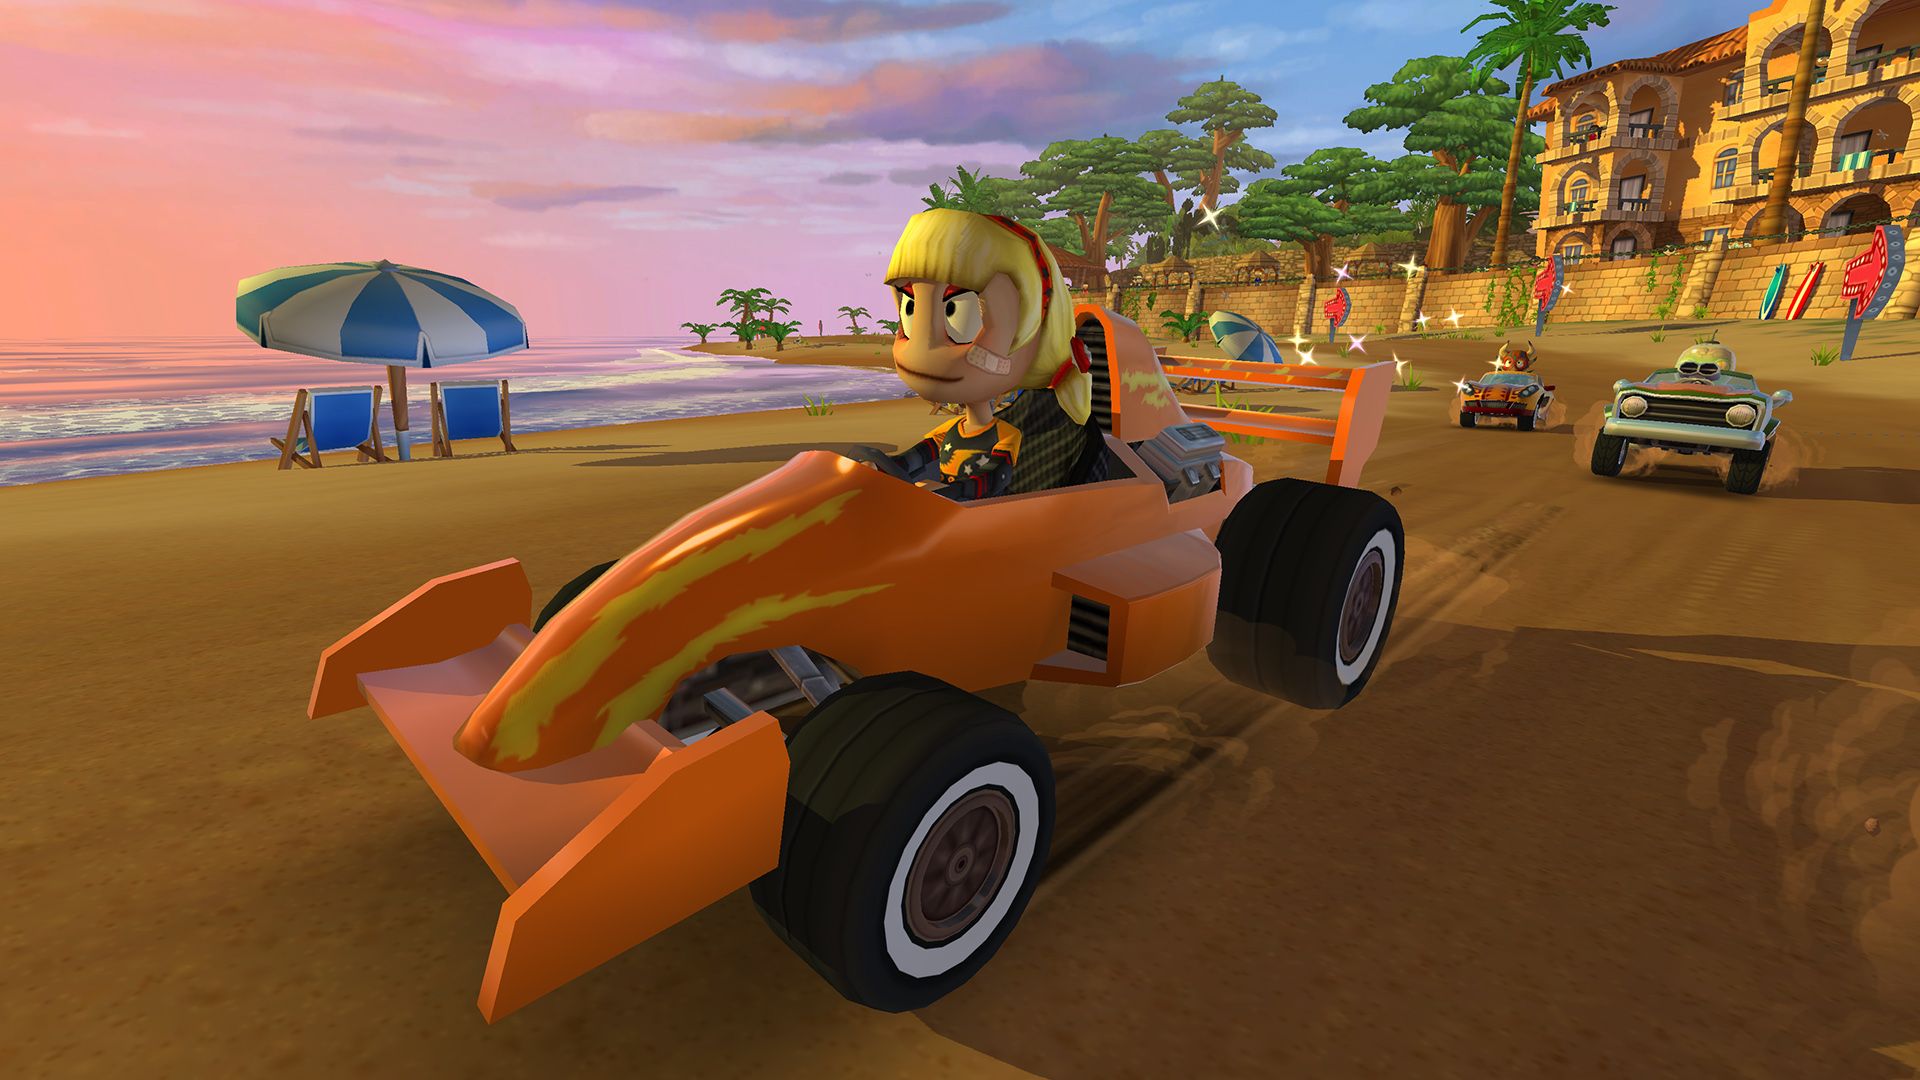 beach buggy racing 2 free download